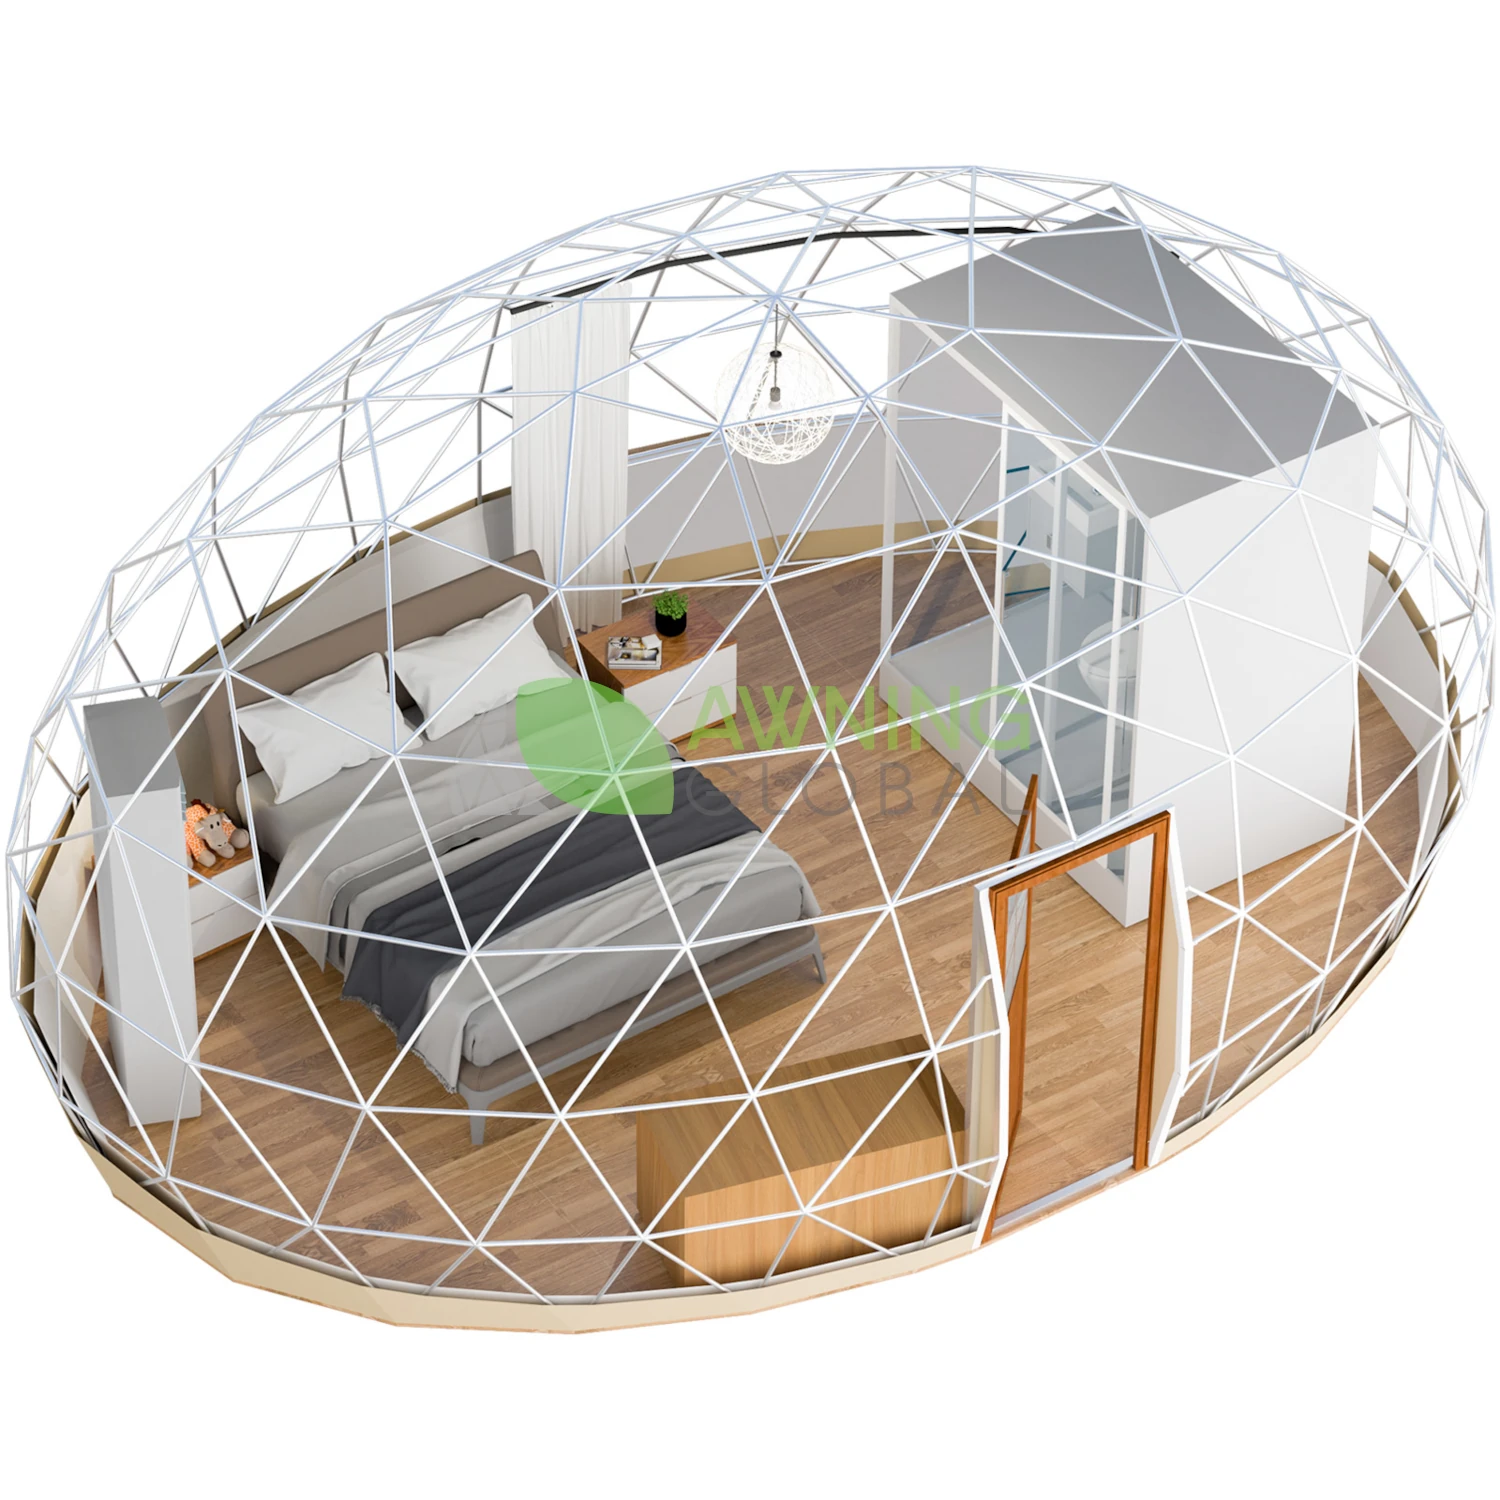 Glamping-dome-tent-oval-shape (2)